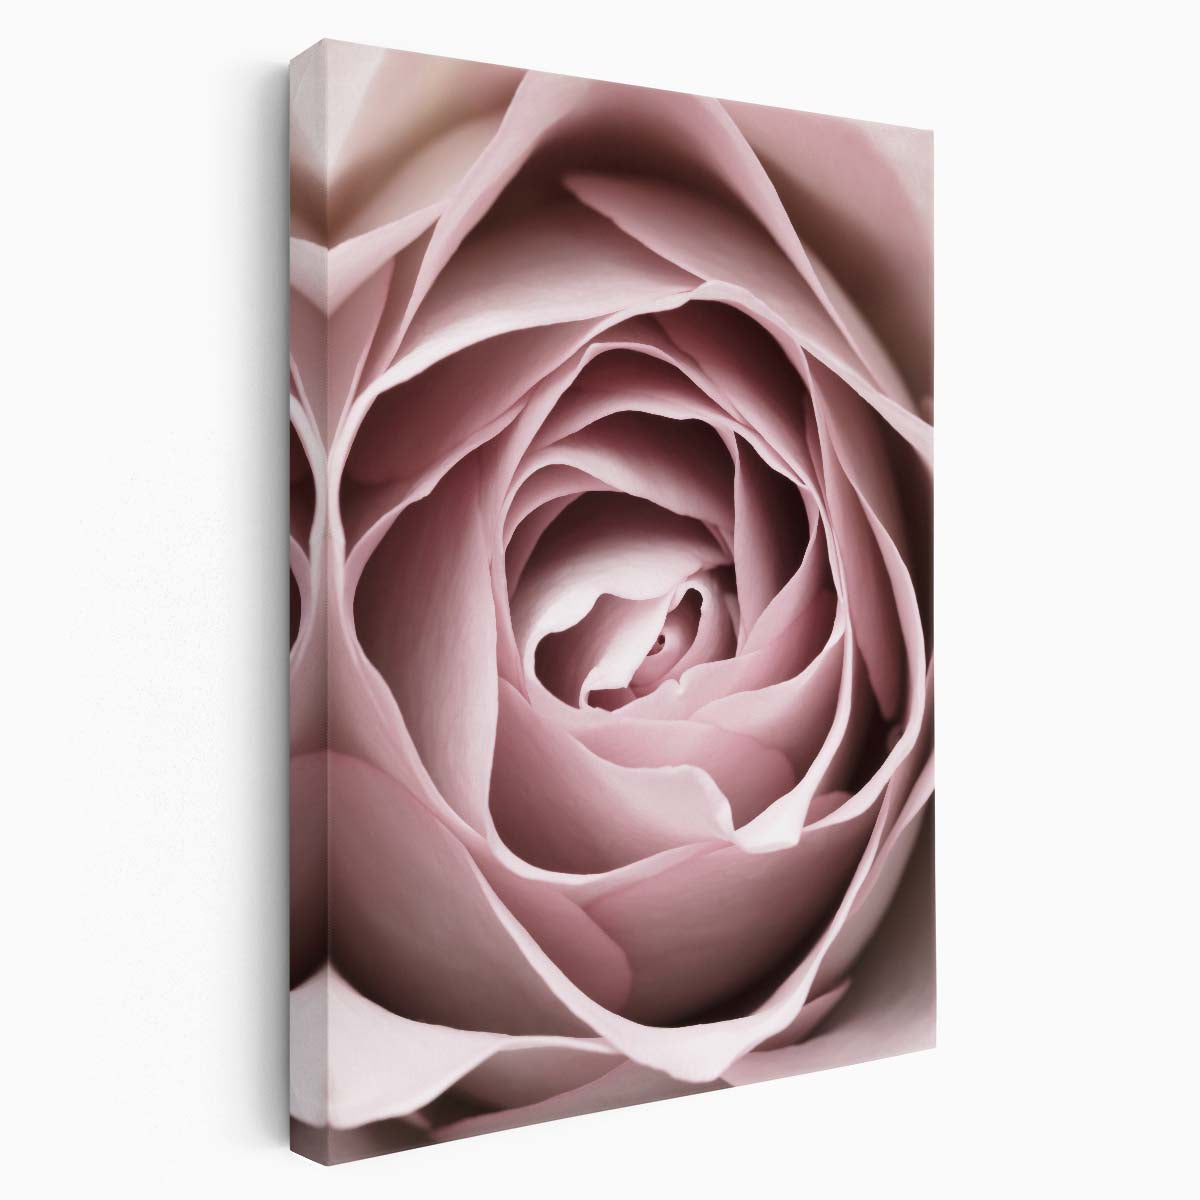 Botanical Photography 1XStudio's Up-close Pink Rose Flower Still Life by Luxuriance Designs, made in USA